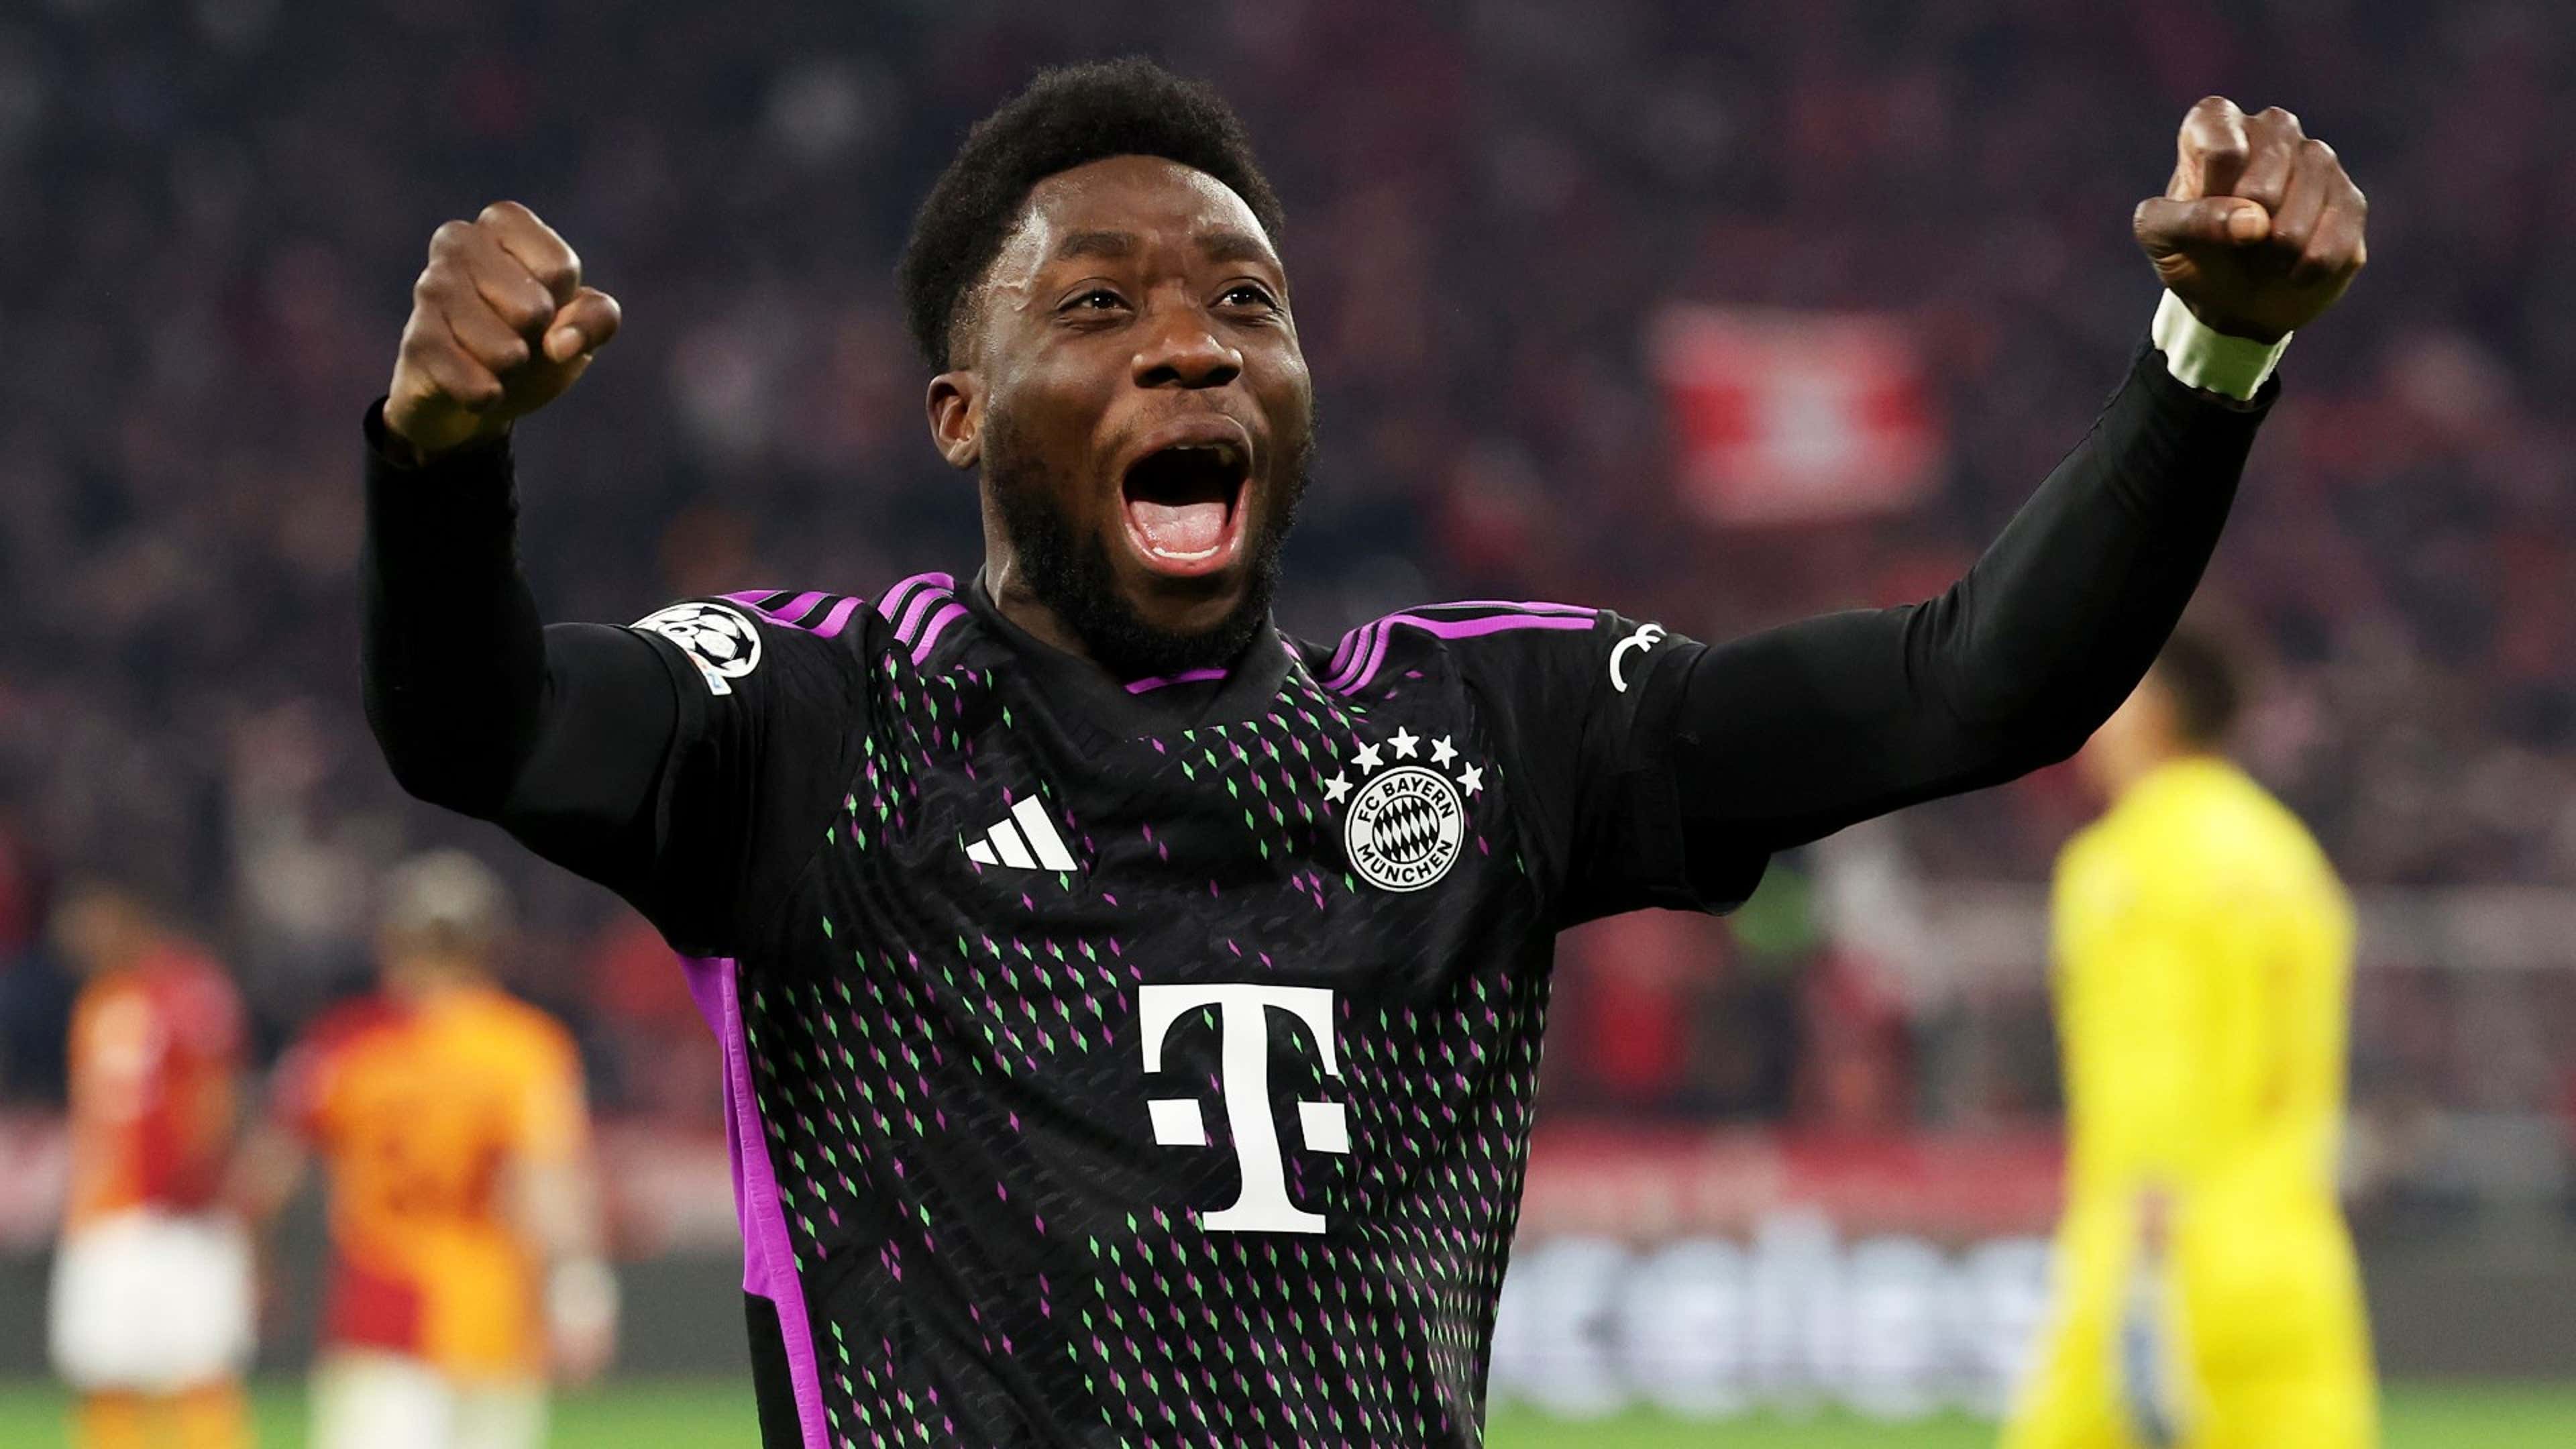 We know it's going to be tough, but we are ready for the fight - Alphonso  Davies reveals Bayern Munich target for 2022-23 season